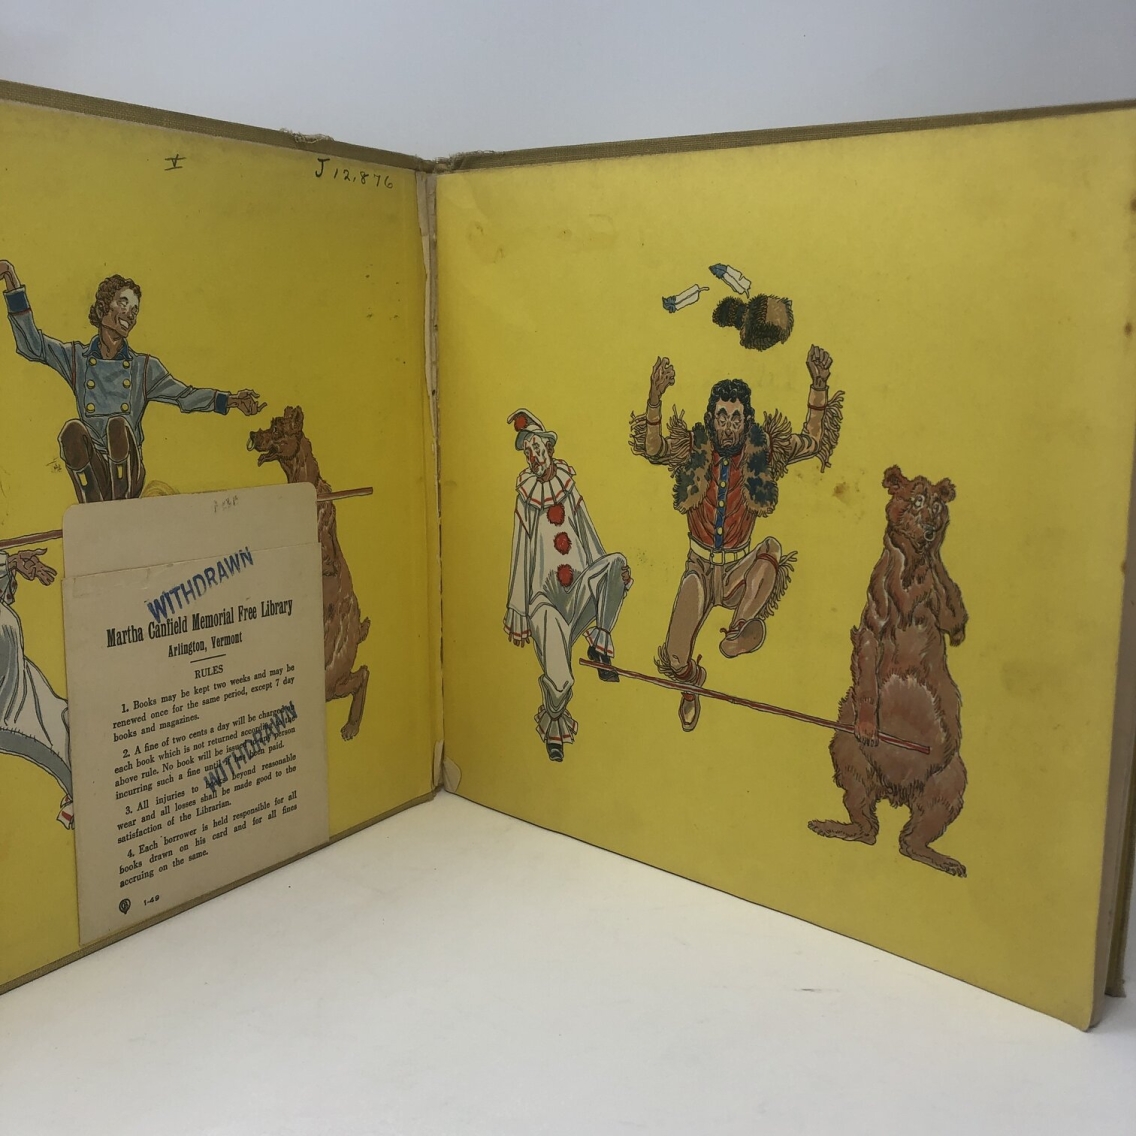 Photograph of the inside of Sam Patch by Arna Bontemps. The pages are yellow with what looks like circus characters mid-performance. There is a library book pocket from the Martha Canfield Memorial Free Library in Arlington, Vermont, stamped twice with the word "withdrawn."